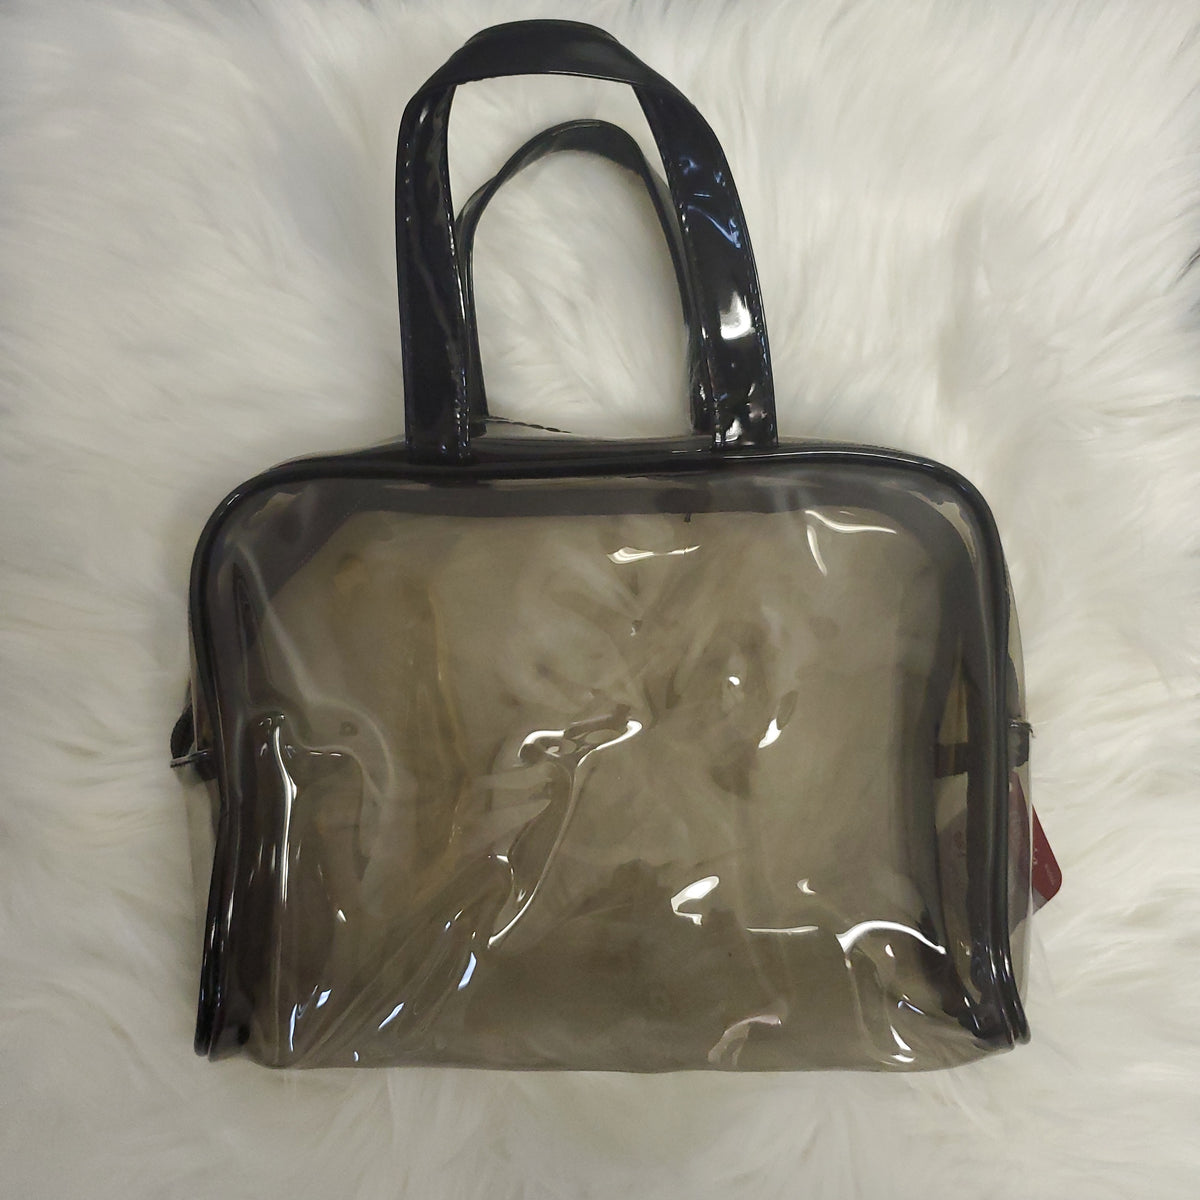 Tinted Cosmetic Bag with Handles